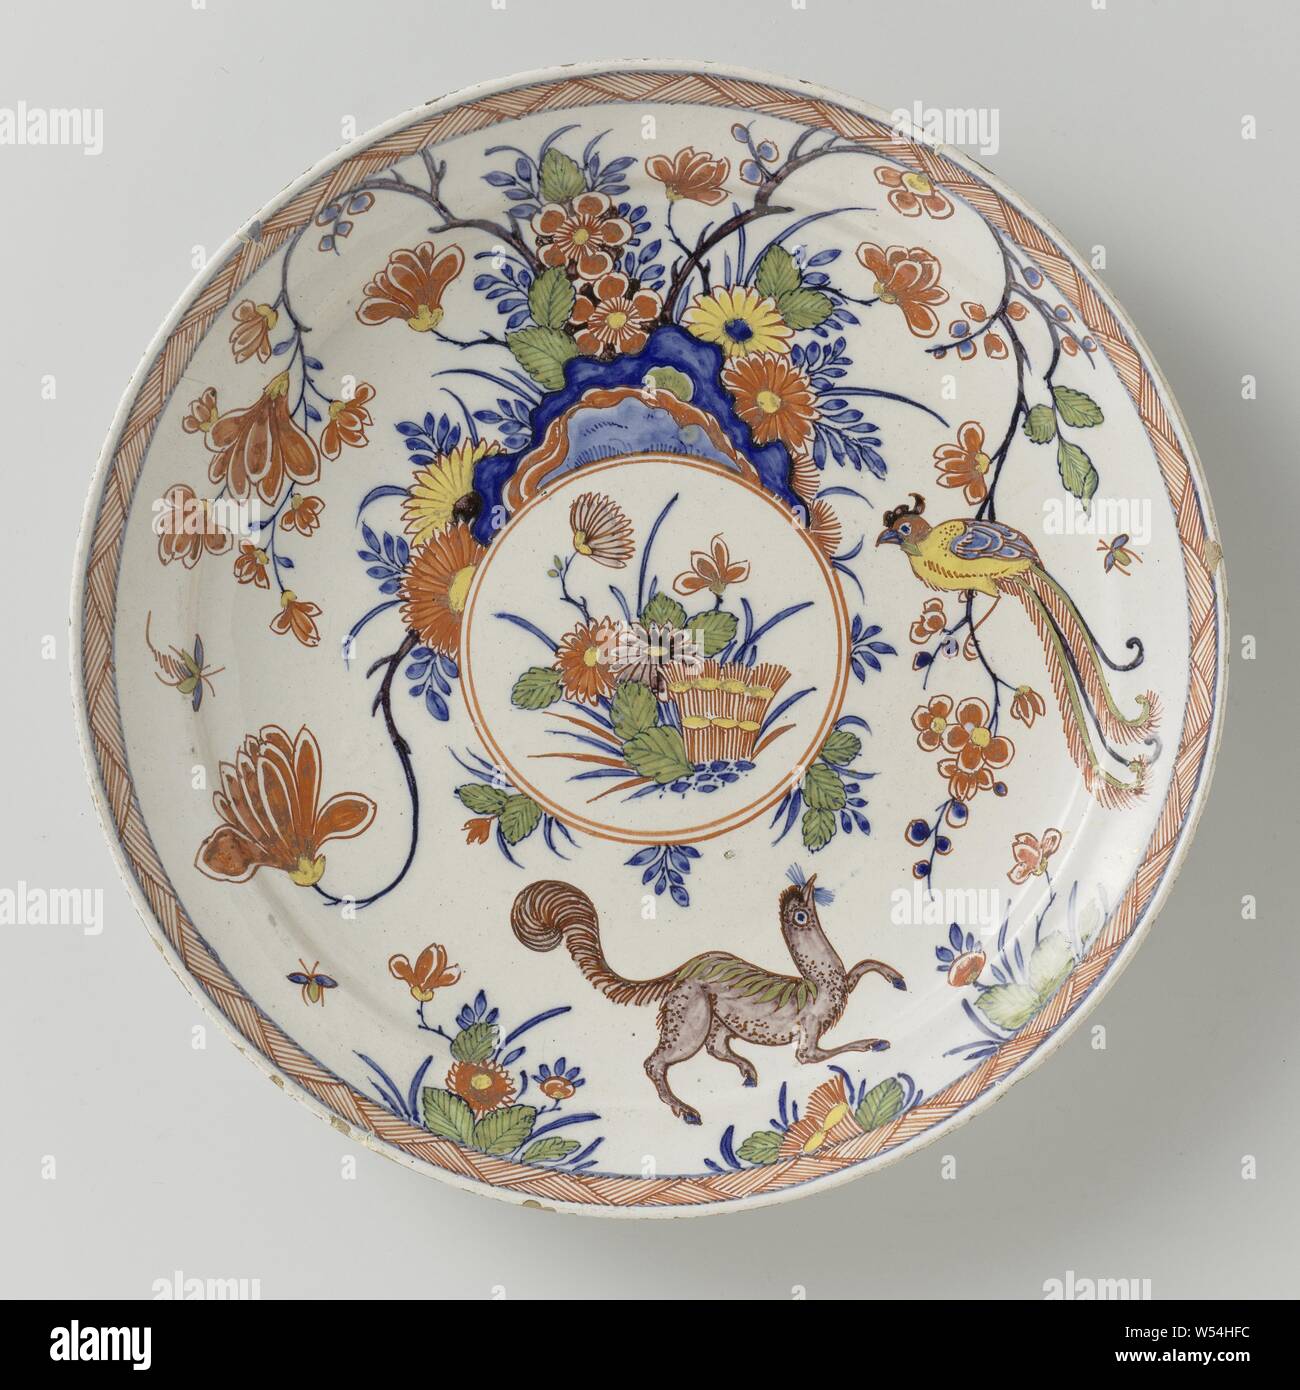 Plate, Plate of faience. Multicolored painted after Japanese Kakiemon example., anonymous, Delft, 1710 - 1740, d 23.1 cm × h 3.1 cm Stock Photo